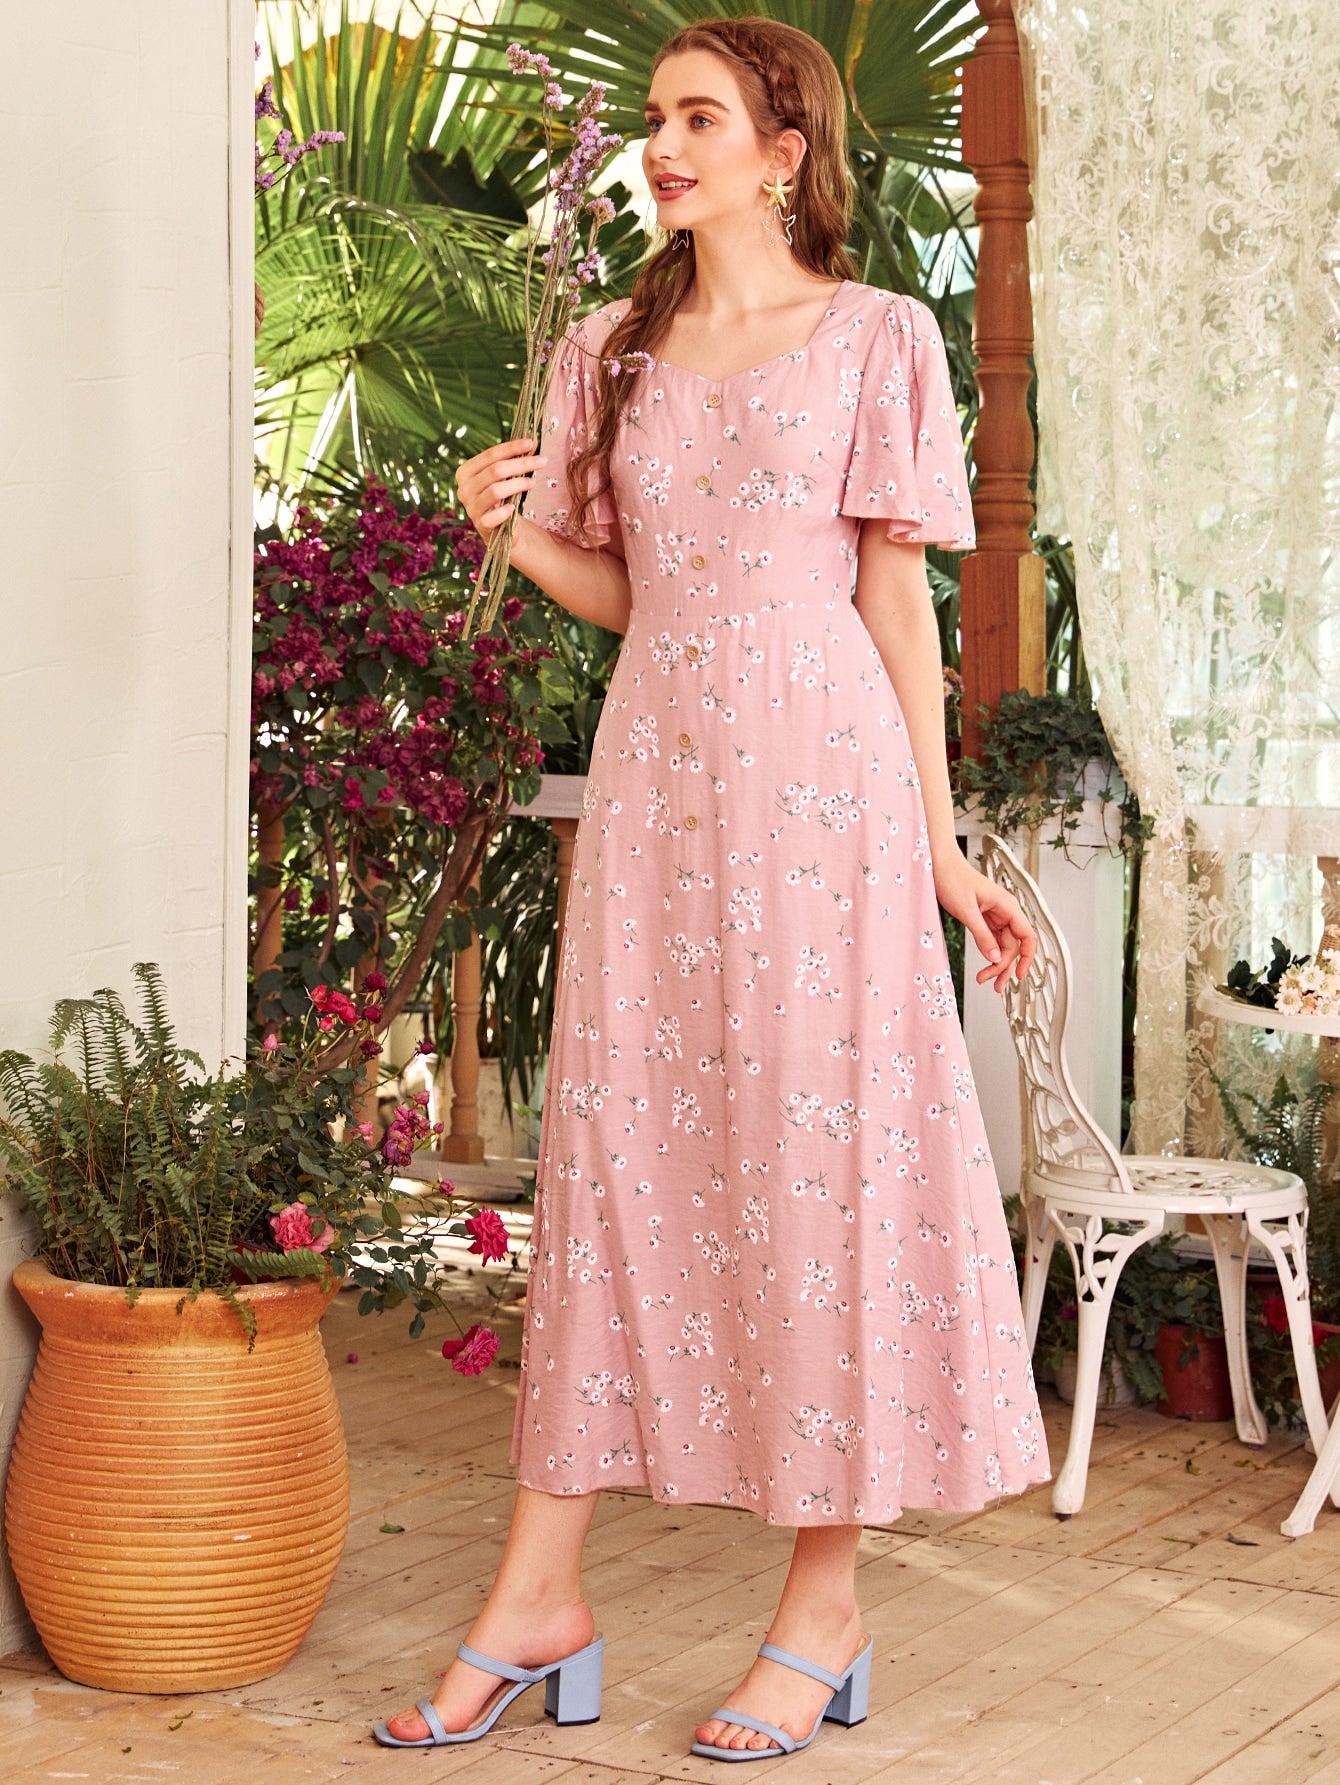 Ditsy Floral Print Sweetheart Neck Butterfly Sleeve Dress